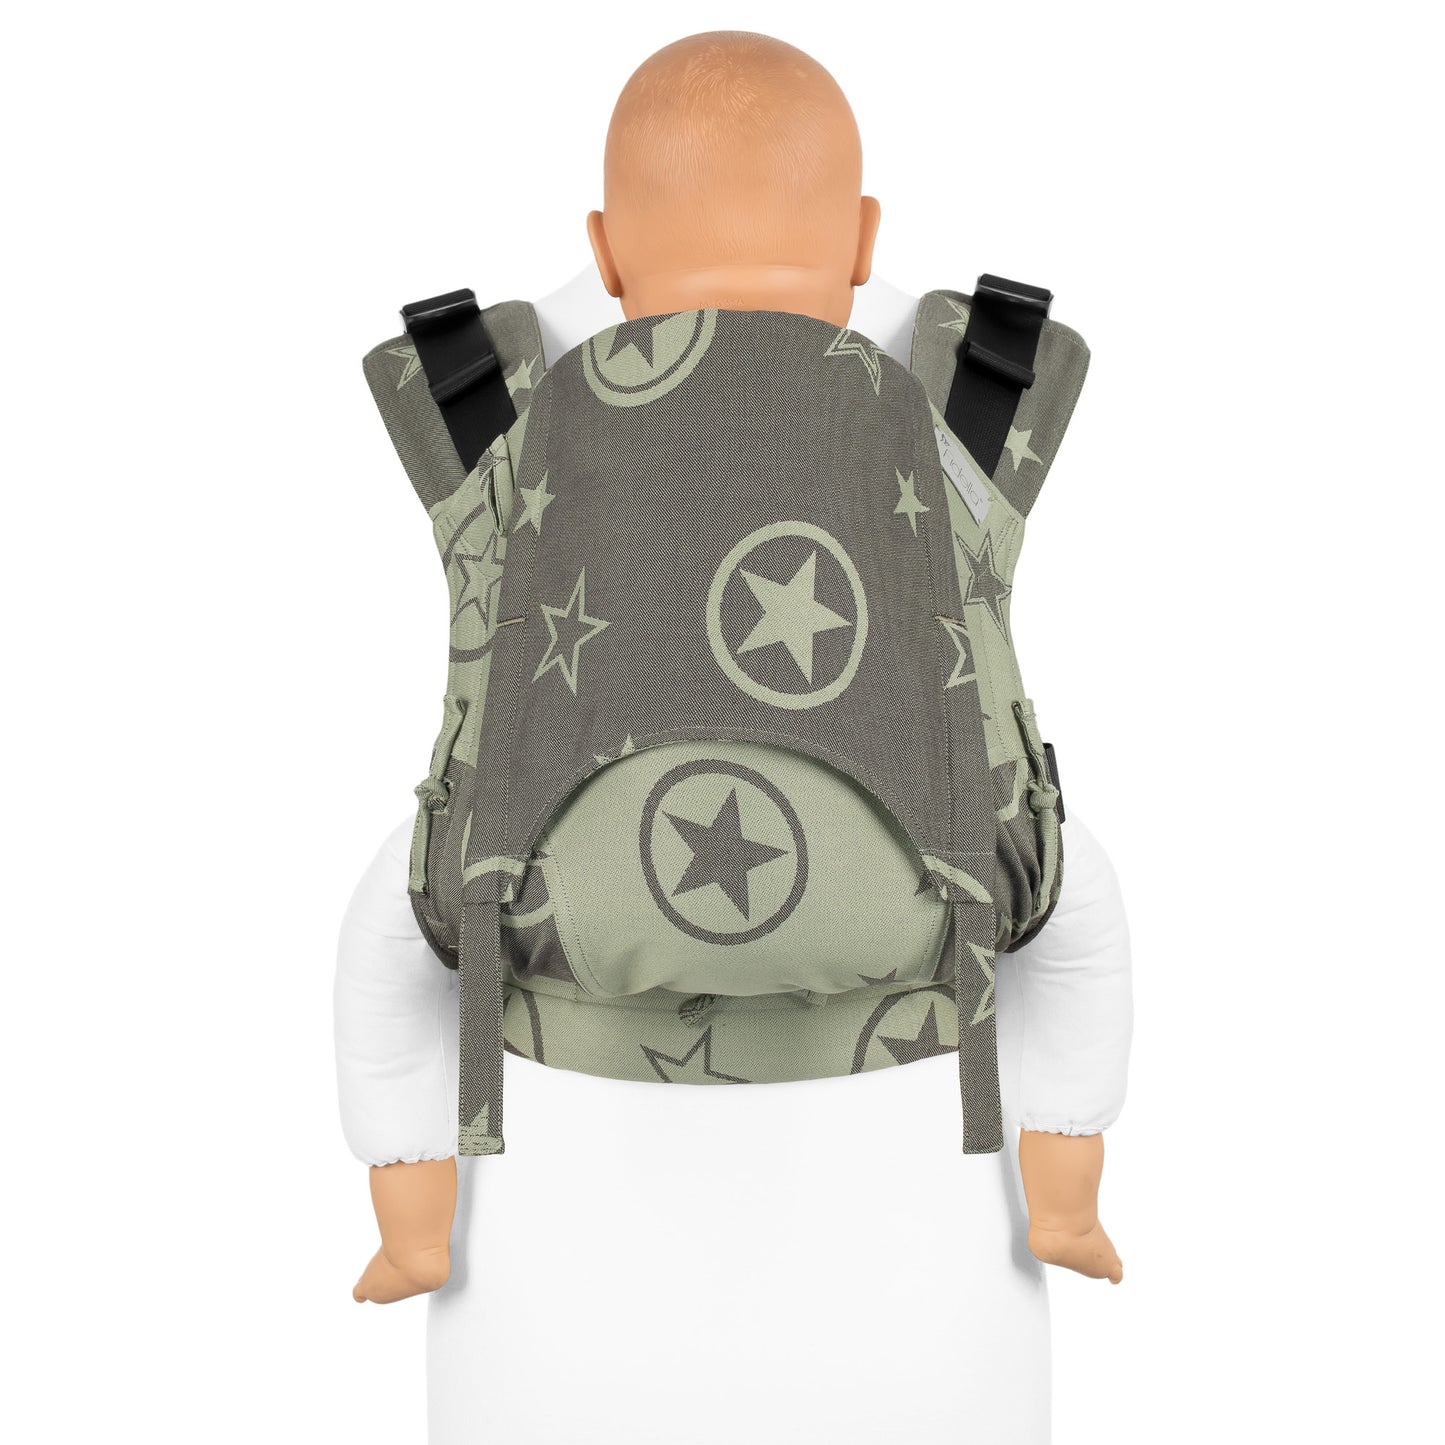 Fusion - Full-Buckle Baby Carrier - Outer Space - green